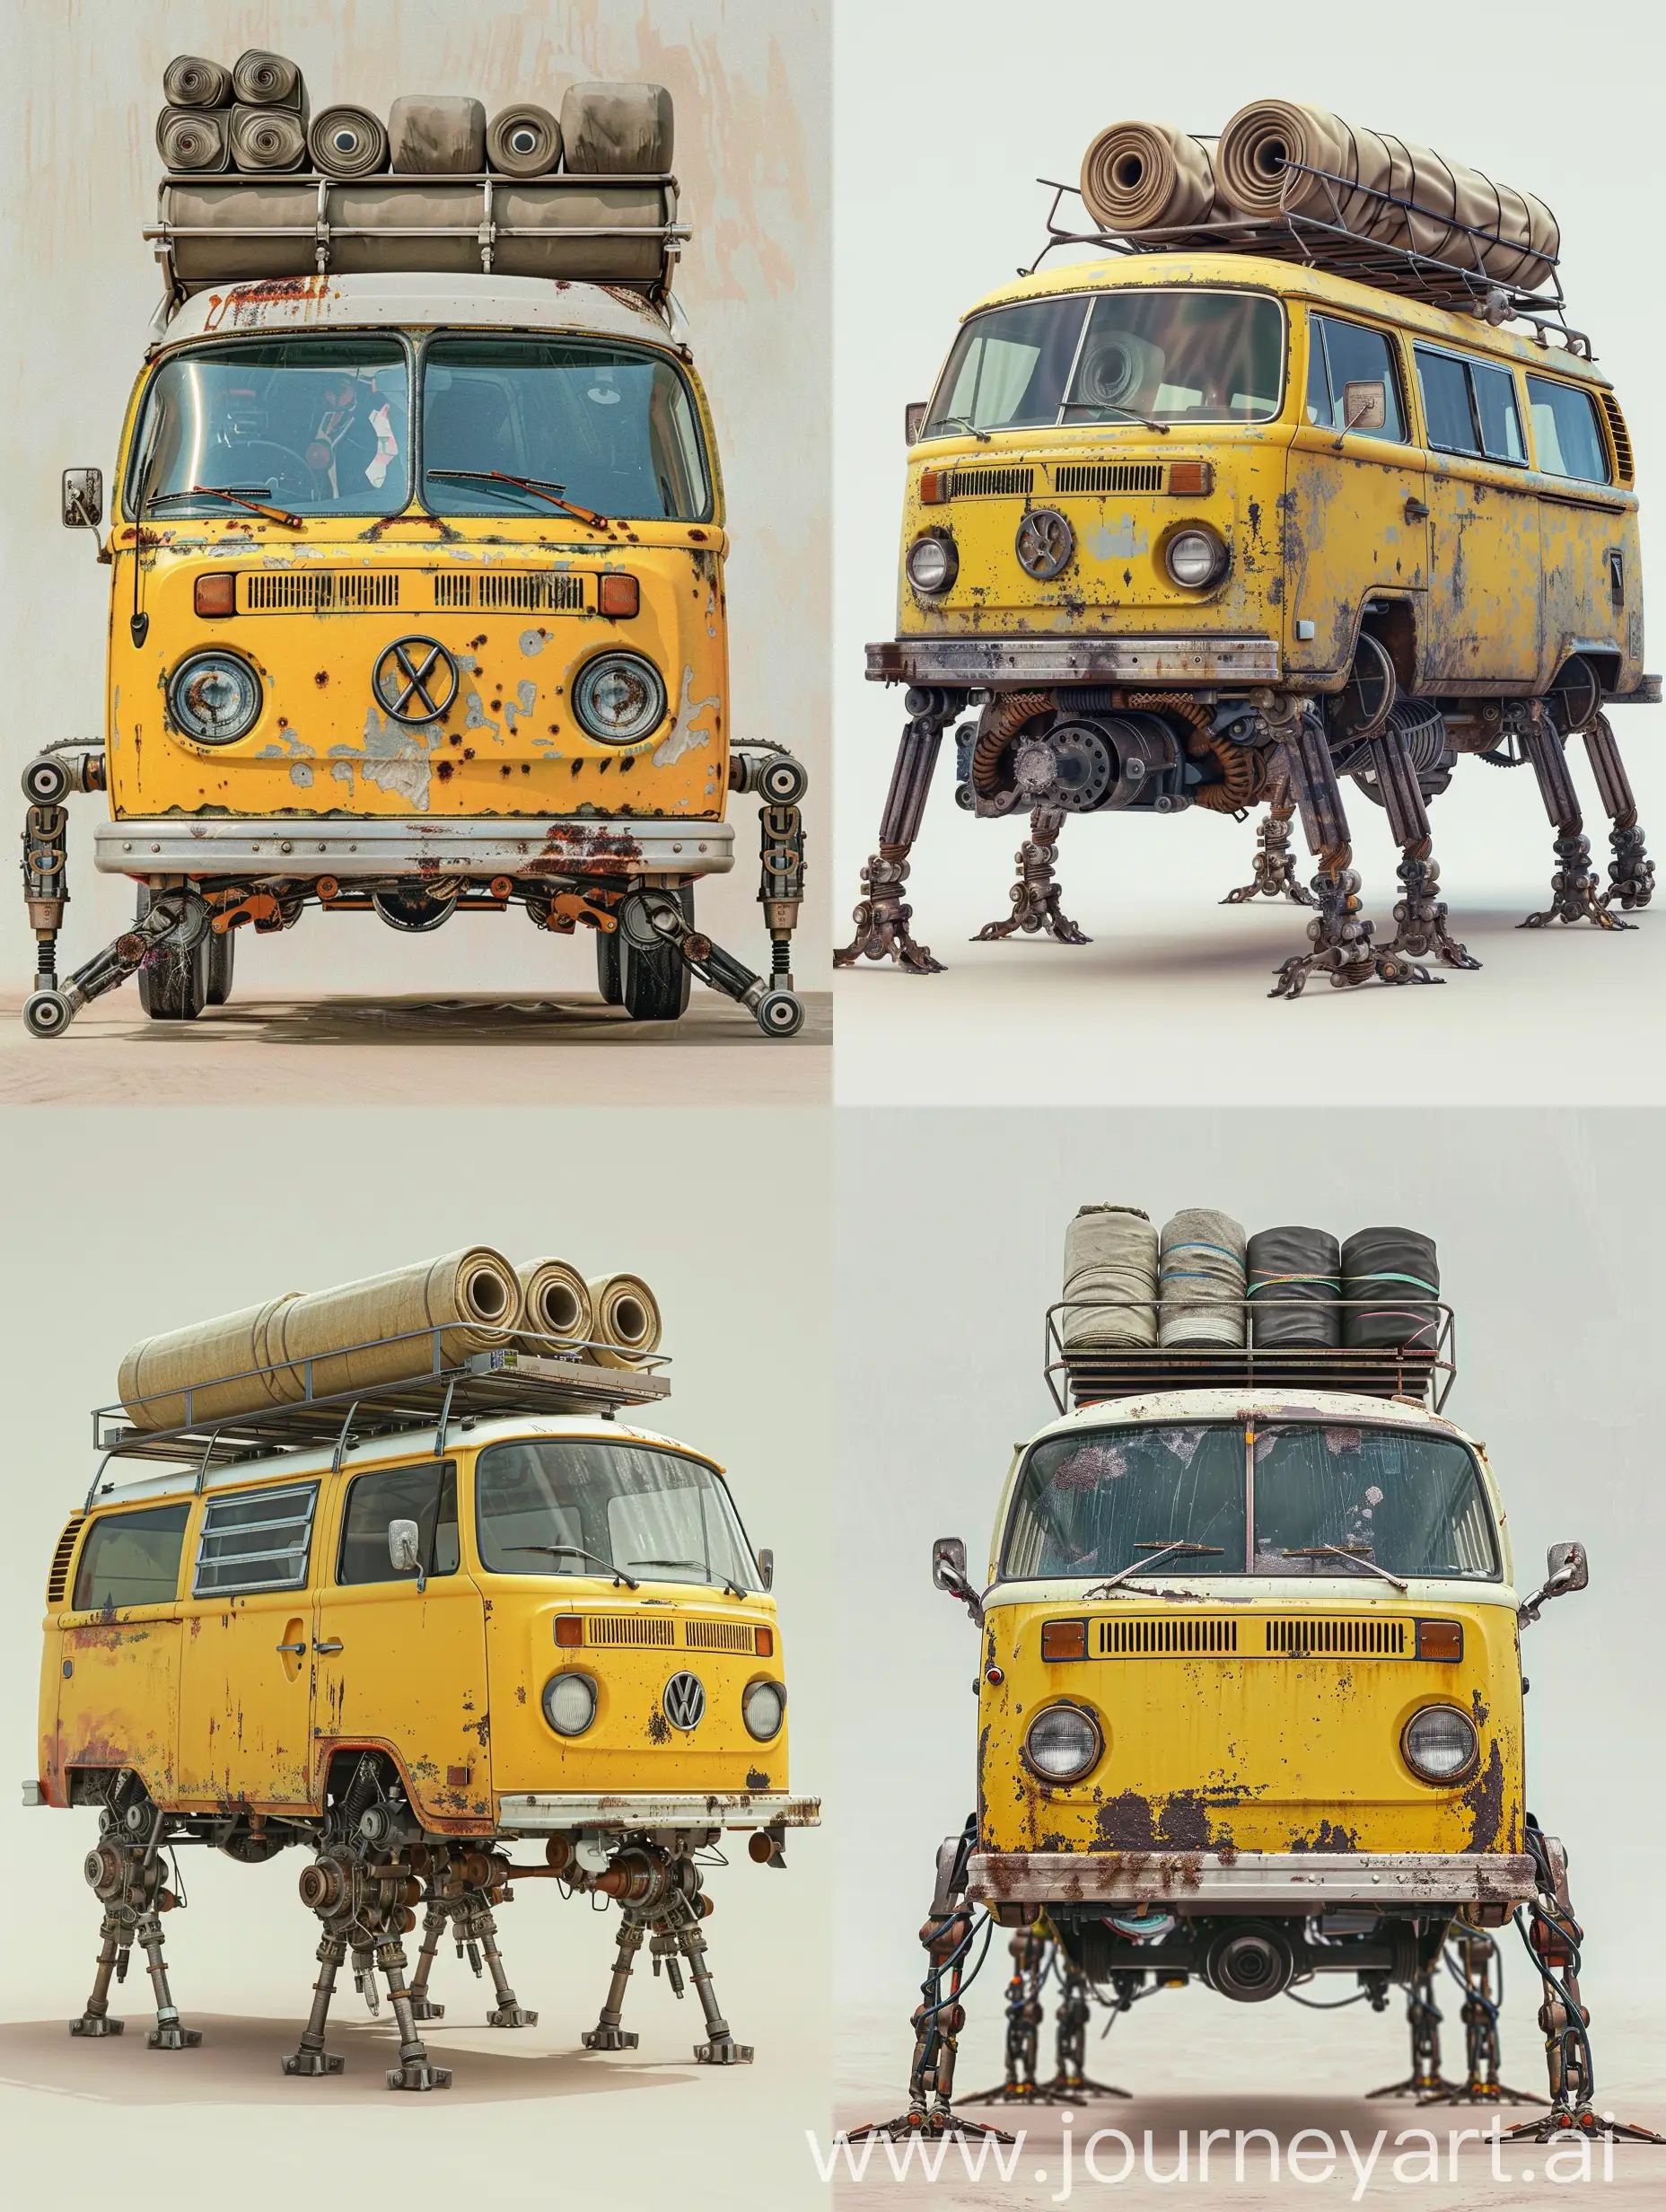 Vintage-Yellow-Van-with-Mechanical-Spider-Legs-and-Adventure-Gear